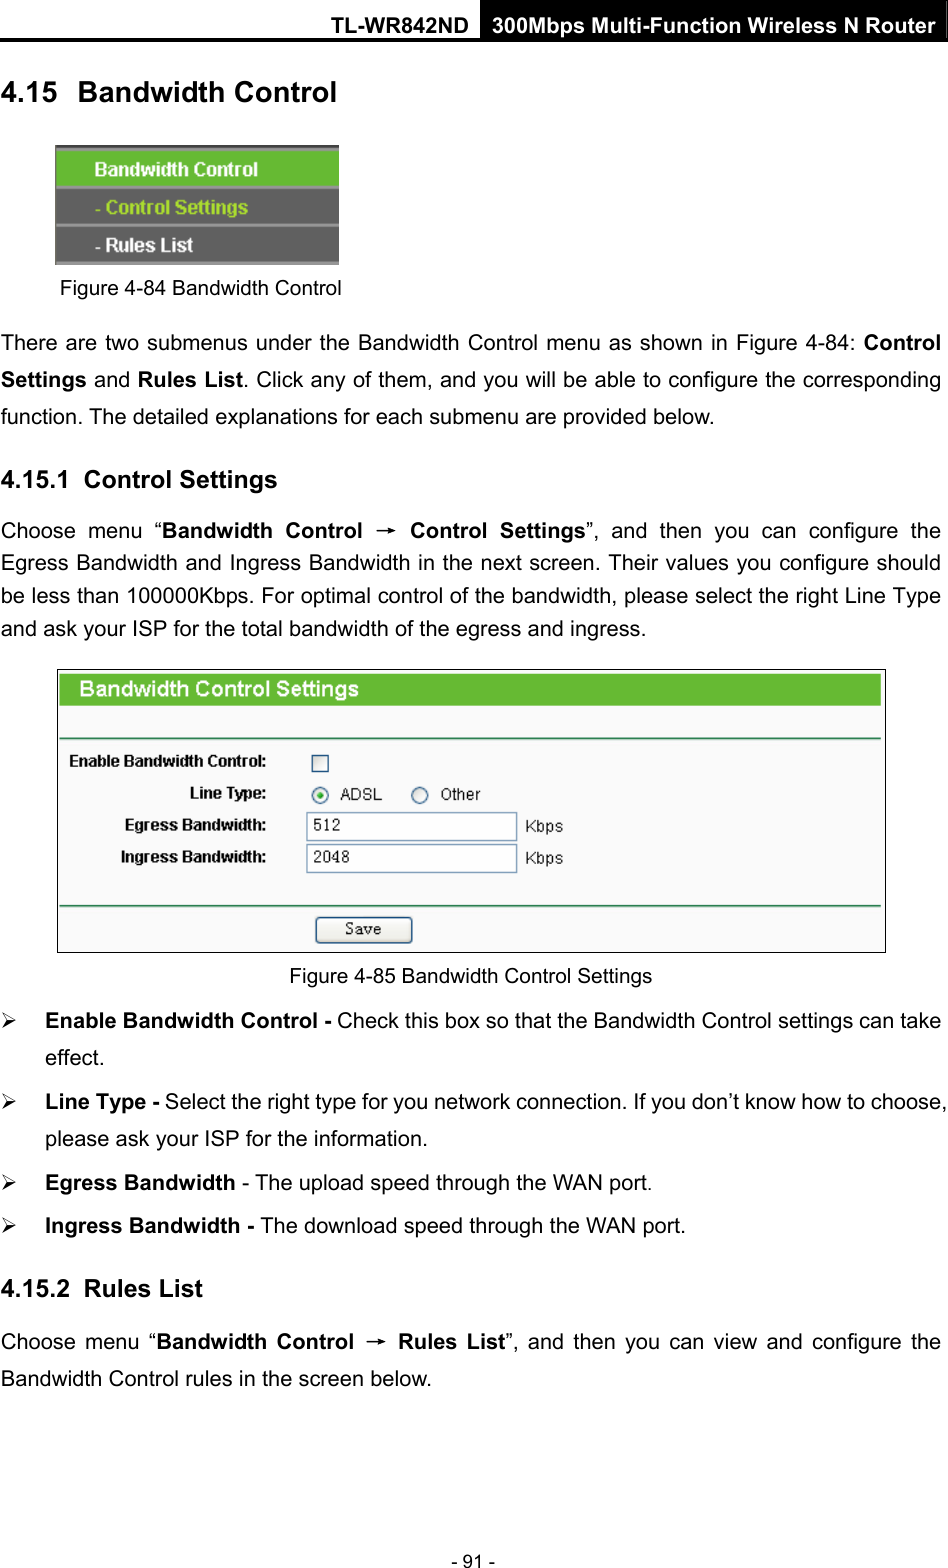 TL-WR842ND 300Mbps Multi-Function Wireless N Router - 91 - 4.15  Bandwidth Control  Figure 4-84 Bandwidth Control There are two submenus under the Bandwidth Control menu as shown in Figure 4-84: Control Settings and Rules List. Click any of them, and you will be able to configure the corresponding function. The detailed explanations for each submenu are provided below. 4.15.1  Control Settings Choose menu “Bandwidth Control → Control Settings”, and then you can configure the Egress Bandwidth and Ingress Bandwidth in the next screen. Their values you configure should be less than 100000Kbps. For optimal control of the bandwidth, please select the right Line Type and ask your ISP for the total bandwidth of the egress and ingress.  Figure 4-85 Bandwidth Control Settings ¾ Enable Bandwidth Control - Check this box so that the Bandwidth Control settings can take effect. ¾ Line Type - Select the right type for you network connection. If you don’t know how to choose, please ask your ISP for the information. ¾ Egress Bandwidth - The upload speed through the WAN port. ¾ Ingress Bandwidth - The download speed through the WAN port. 4.15.2  Rules List Choose menu “Bandwidth Control → Rules List”, and then you can view and configure the Bandwidth Control rules in the screen below. 